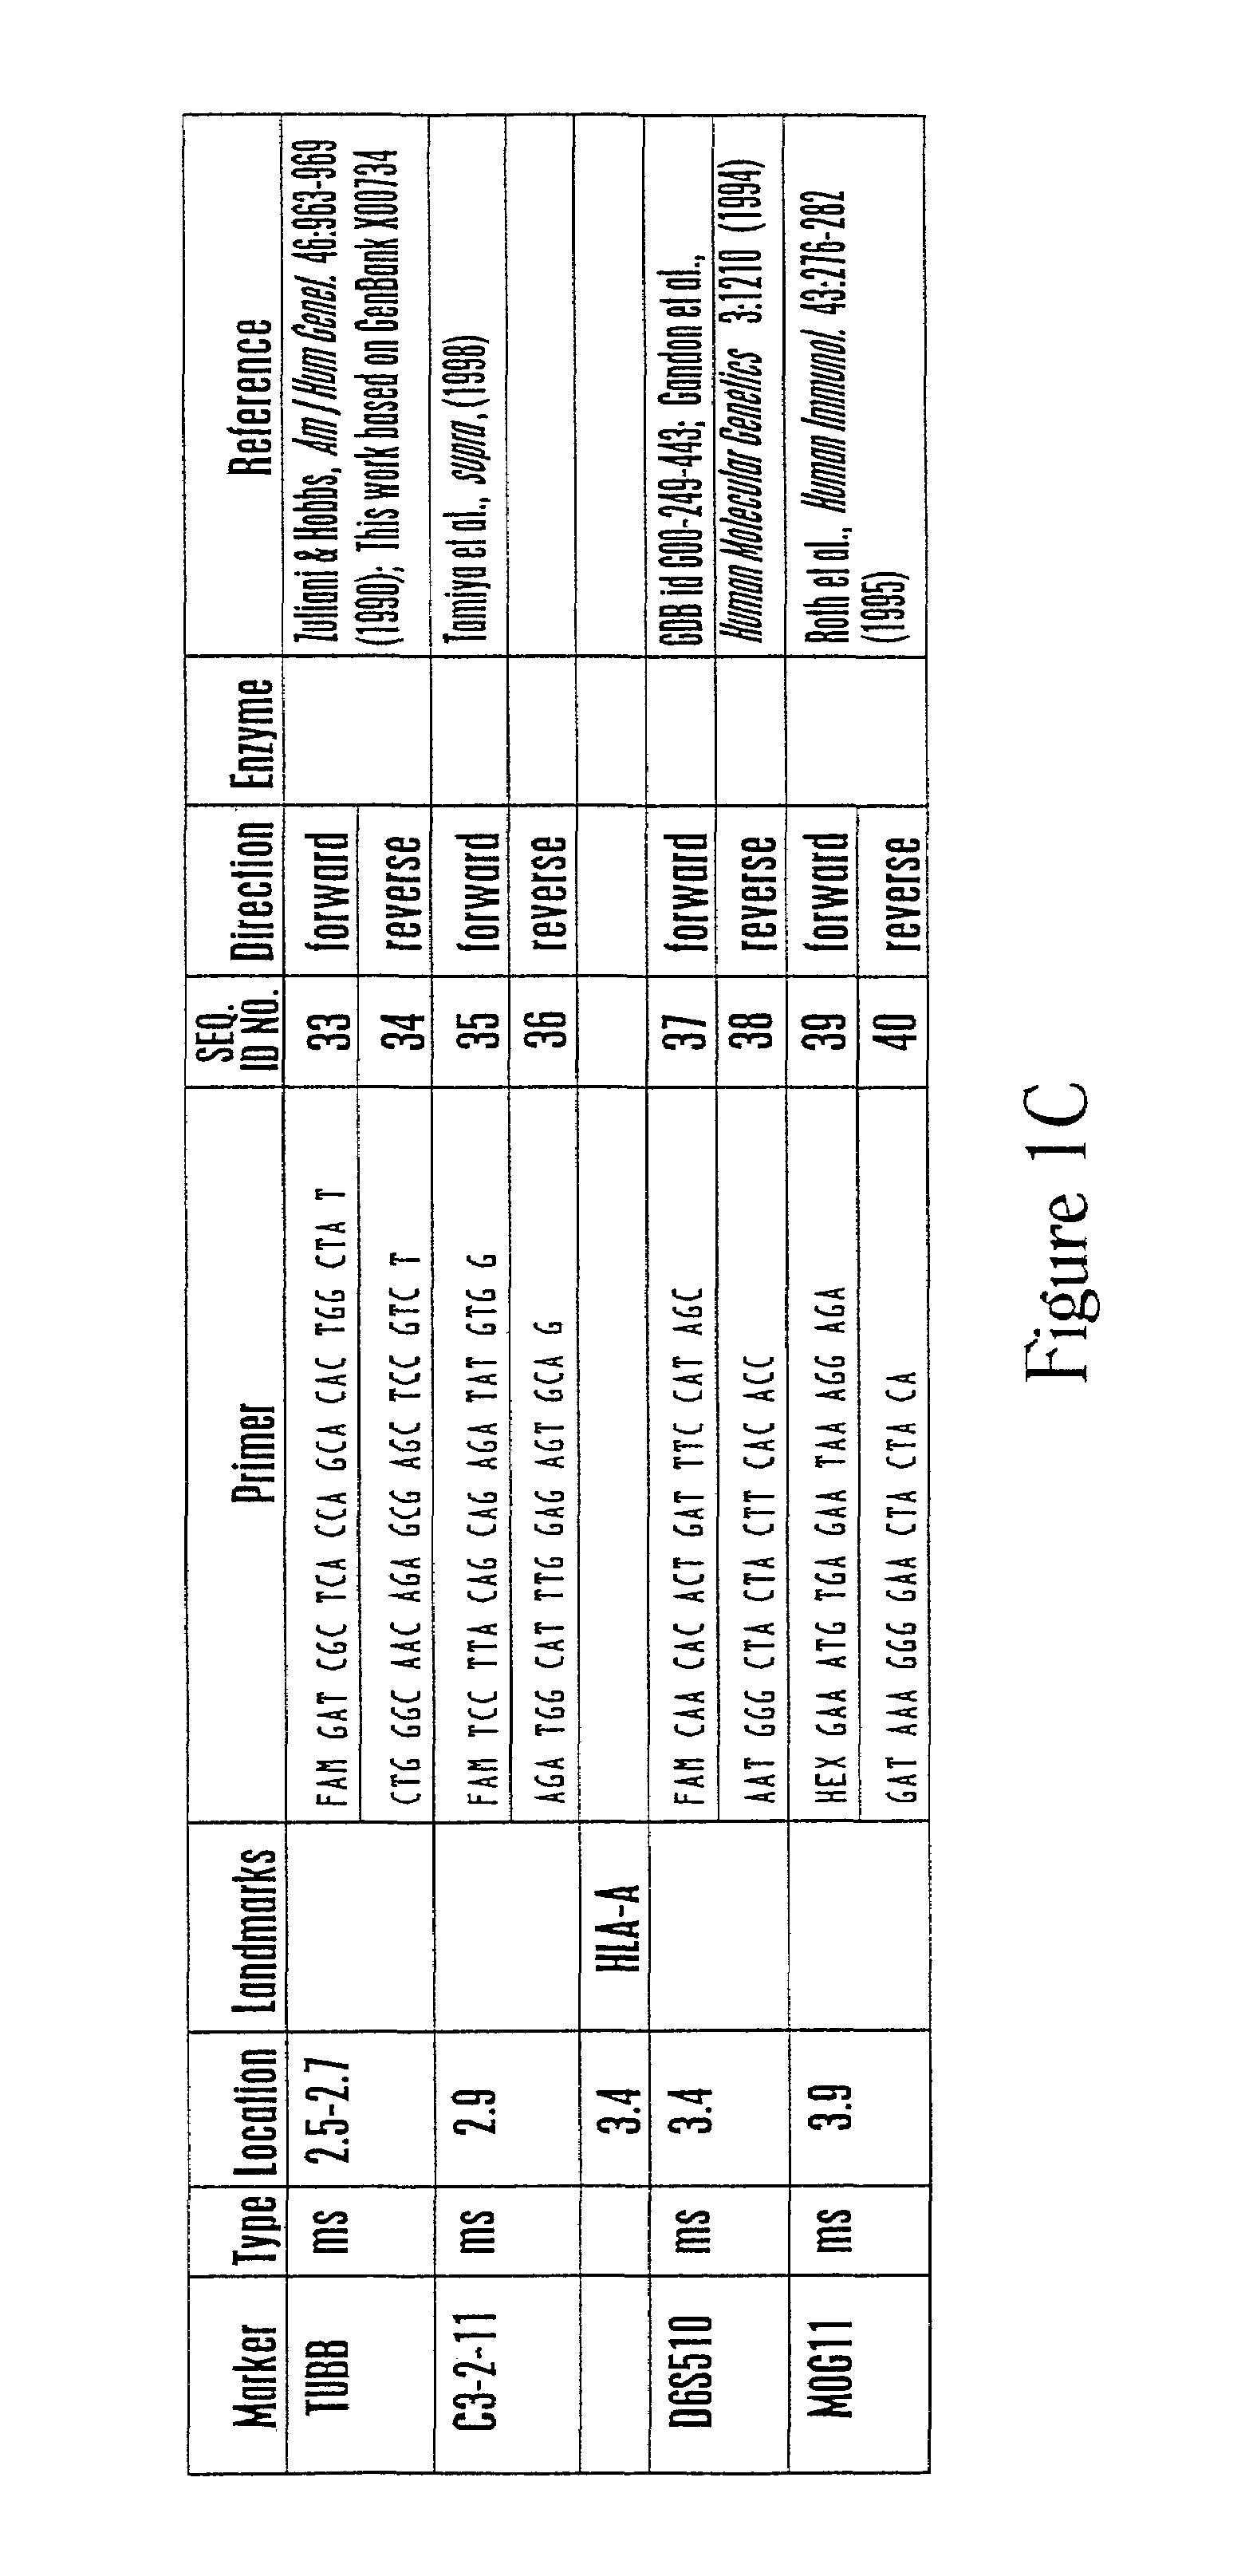 Methods of using a major histocompatibility complex class III haplotype to diagnose Crohn's disease